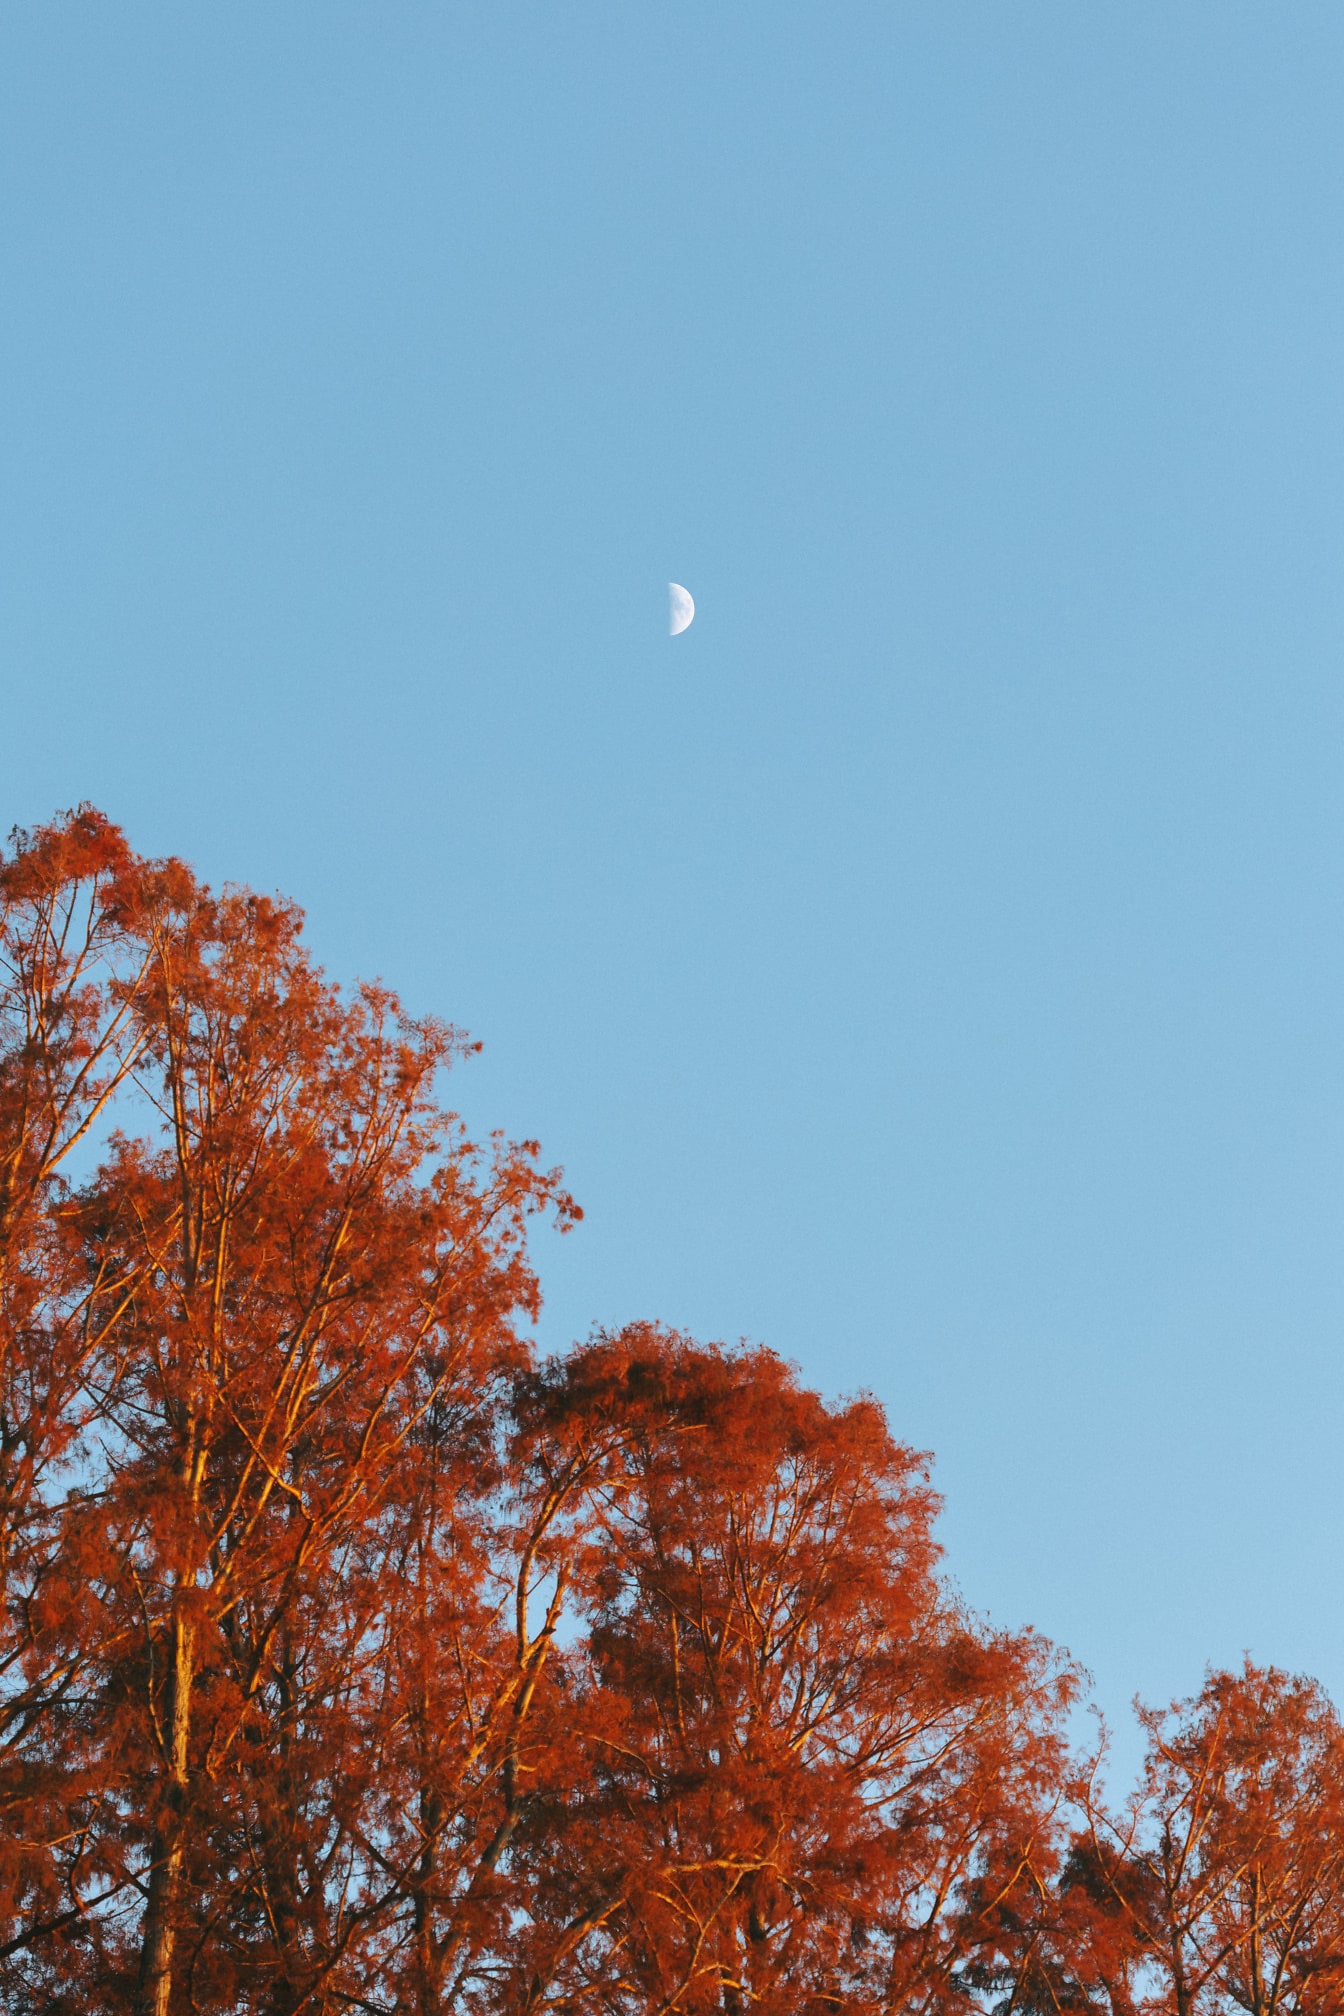 Orange yellow leaves on trees with bright blue sky with Moon eclipse